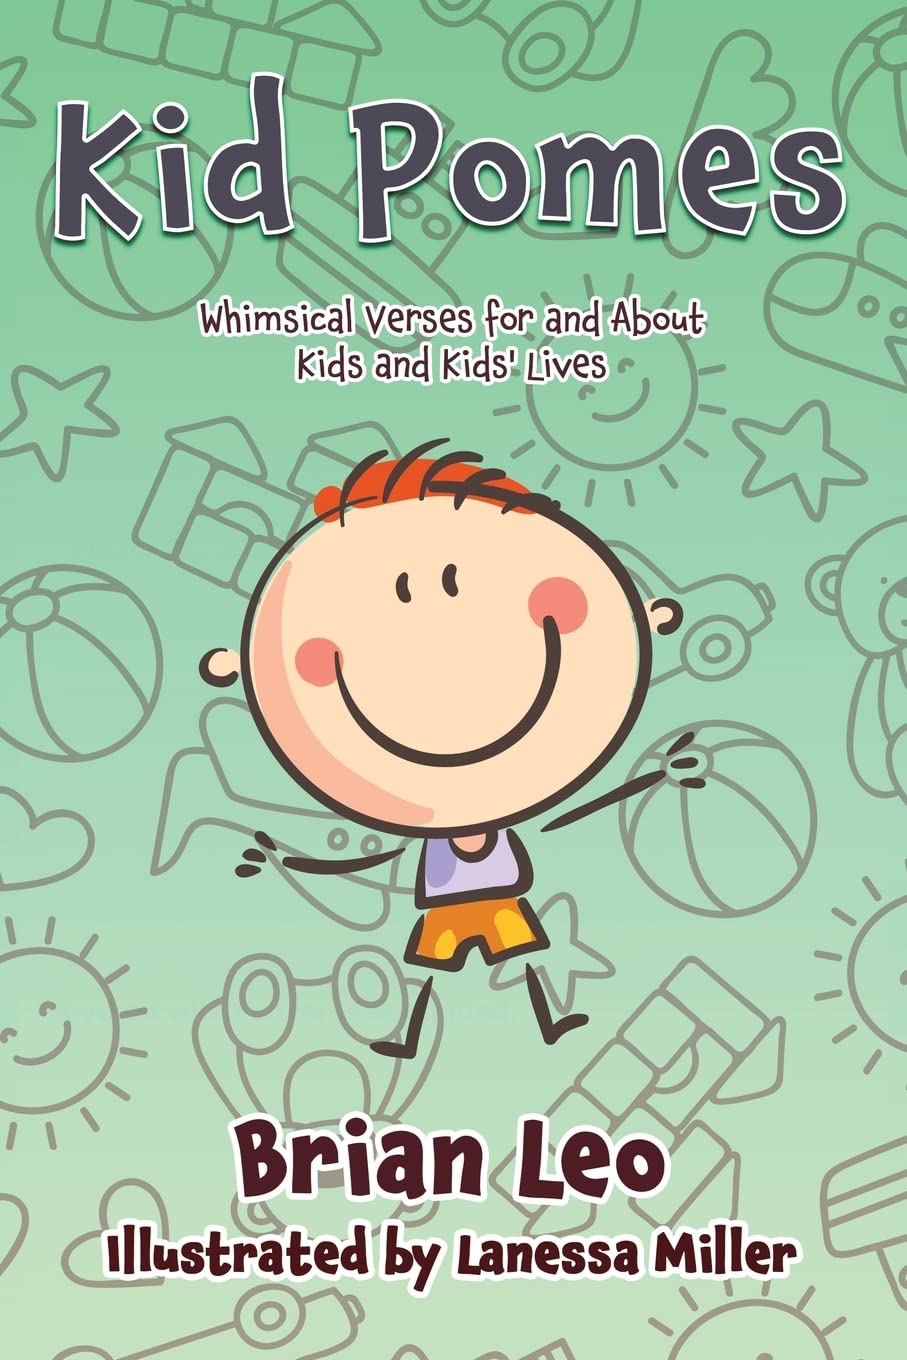 Author’s Tranquility Press presents “Kid Pomes”: A Collection of Poems for Kids 18